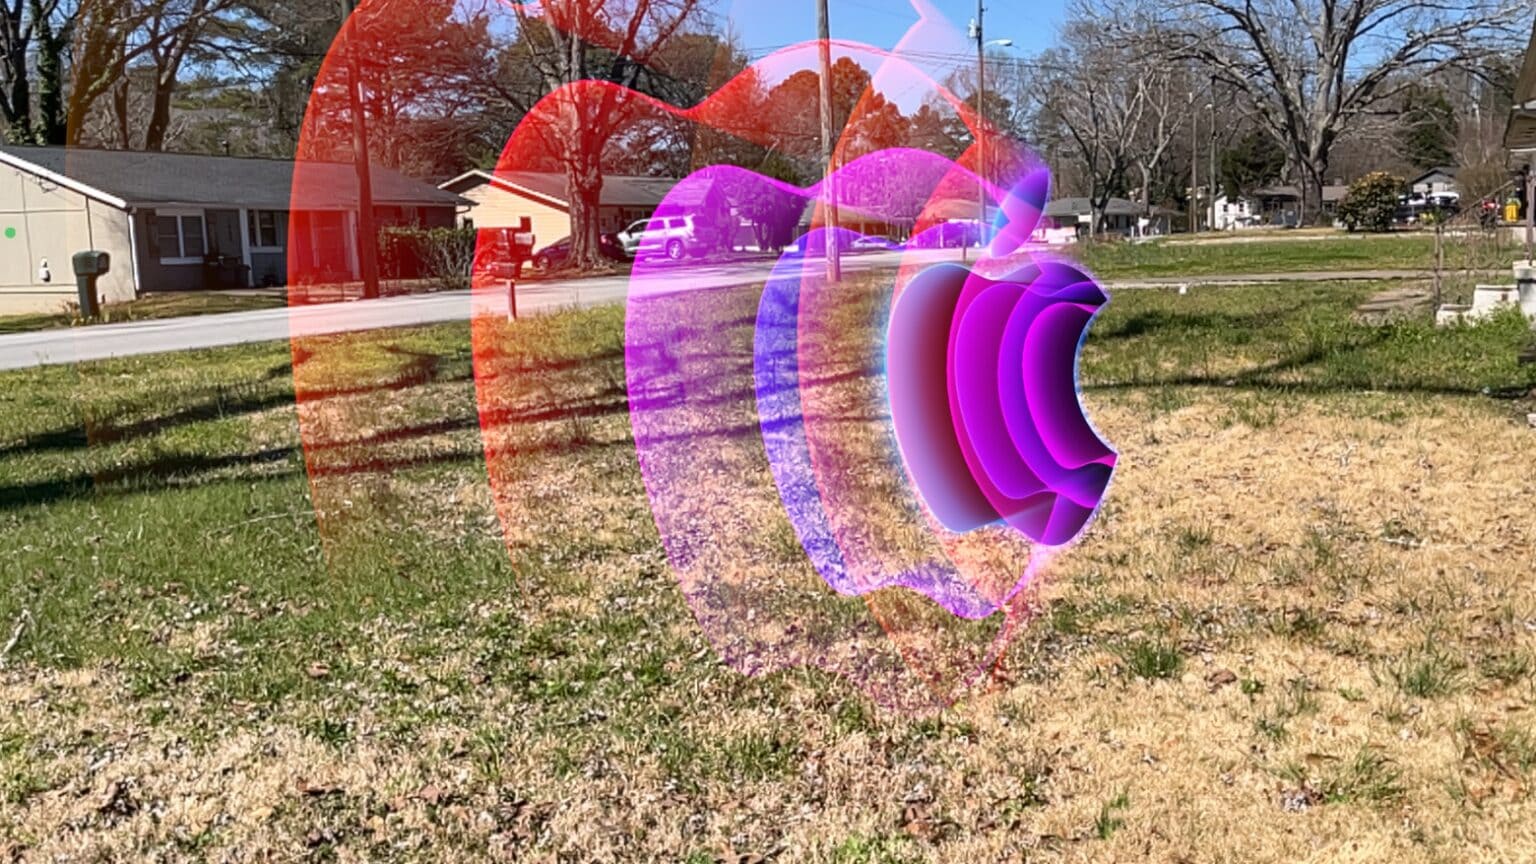 How to see the AR Easter egg hidden in Apple’s spring event invite